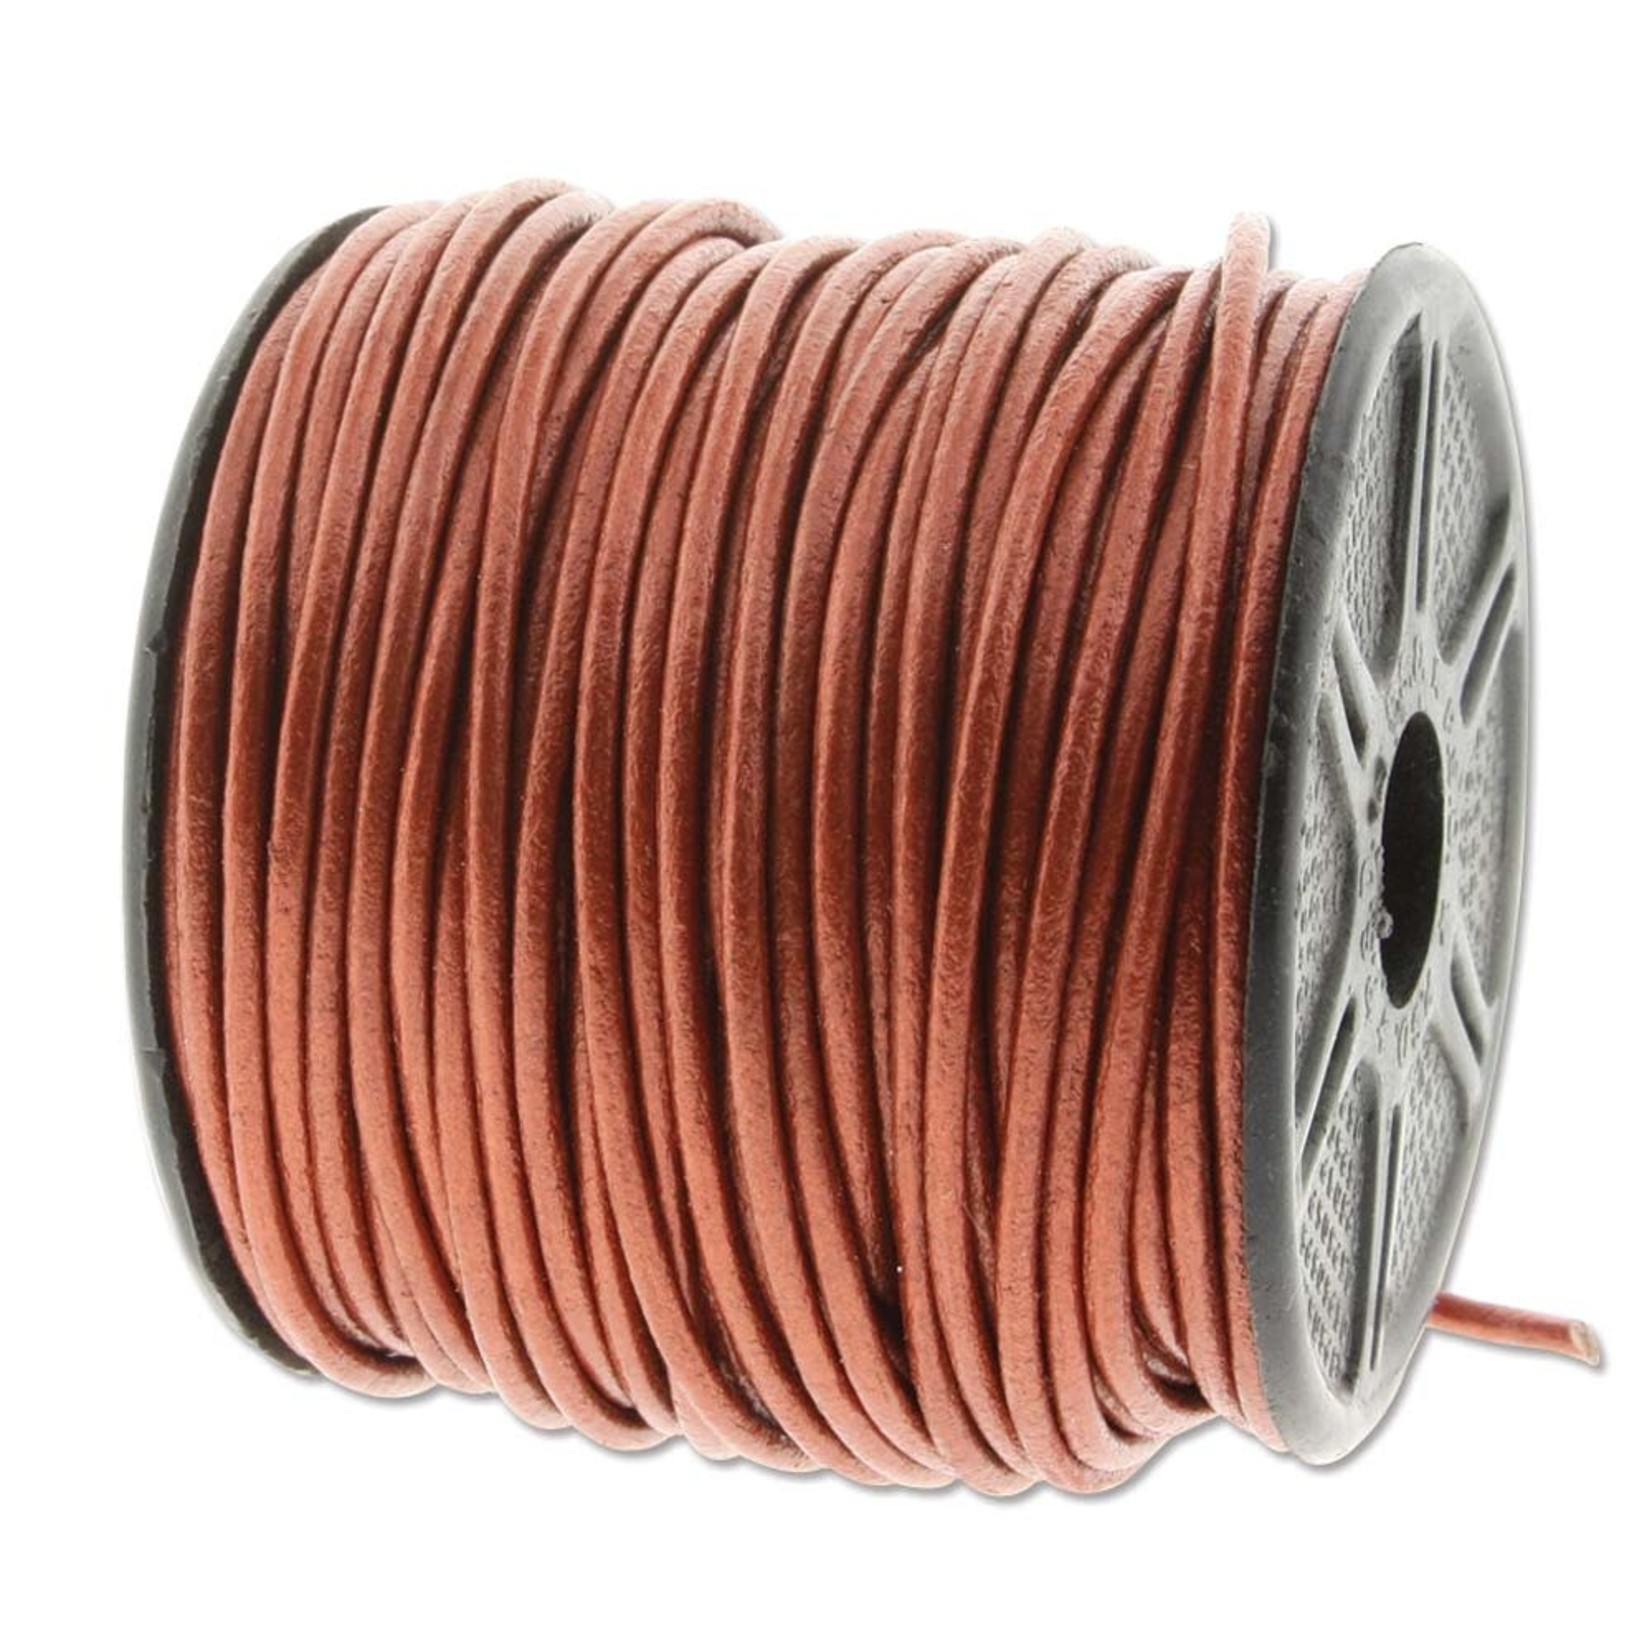 Leather 1mm Round Cord Metallic Copper - 1 foot